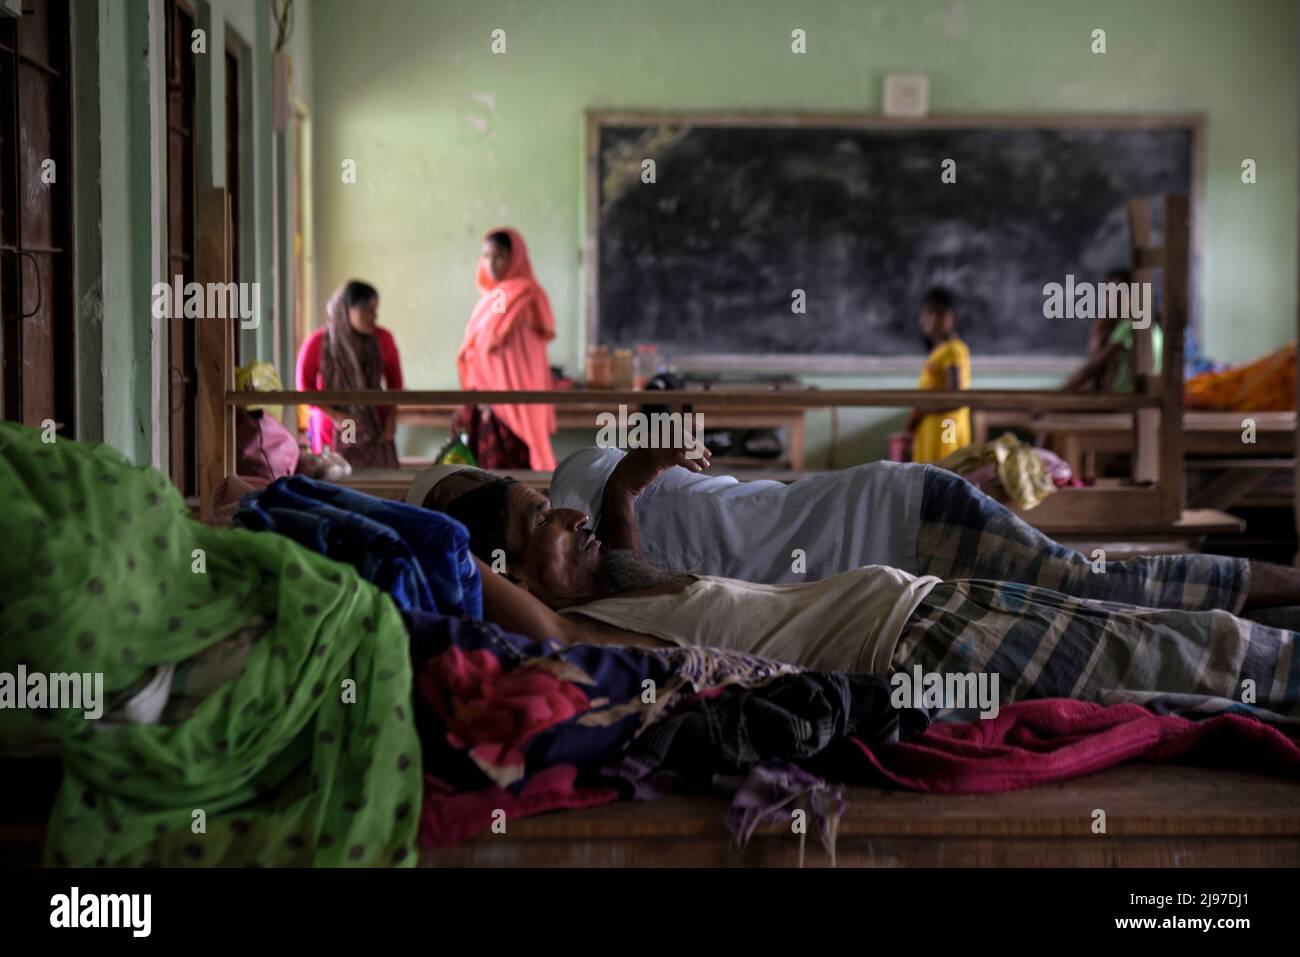 Assam, India. 20th May, 2022. Villagers affected by a flood take shelter at a school, after flooding flowing heavy rainfall, in Nagaon, Assam, India on 20 May 2022. At least 10 people have died in floods and landslides due to pre monsoon rain in Assam. Credit: David Talukdar/Alamy Live News Credit: David Talukdar/Alamy Live News Stock Photo